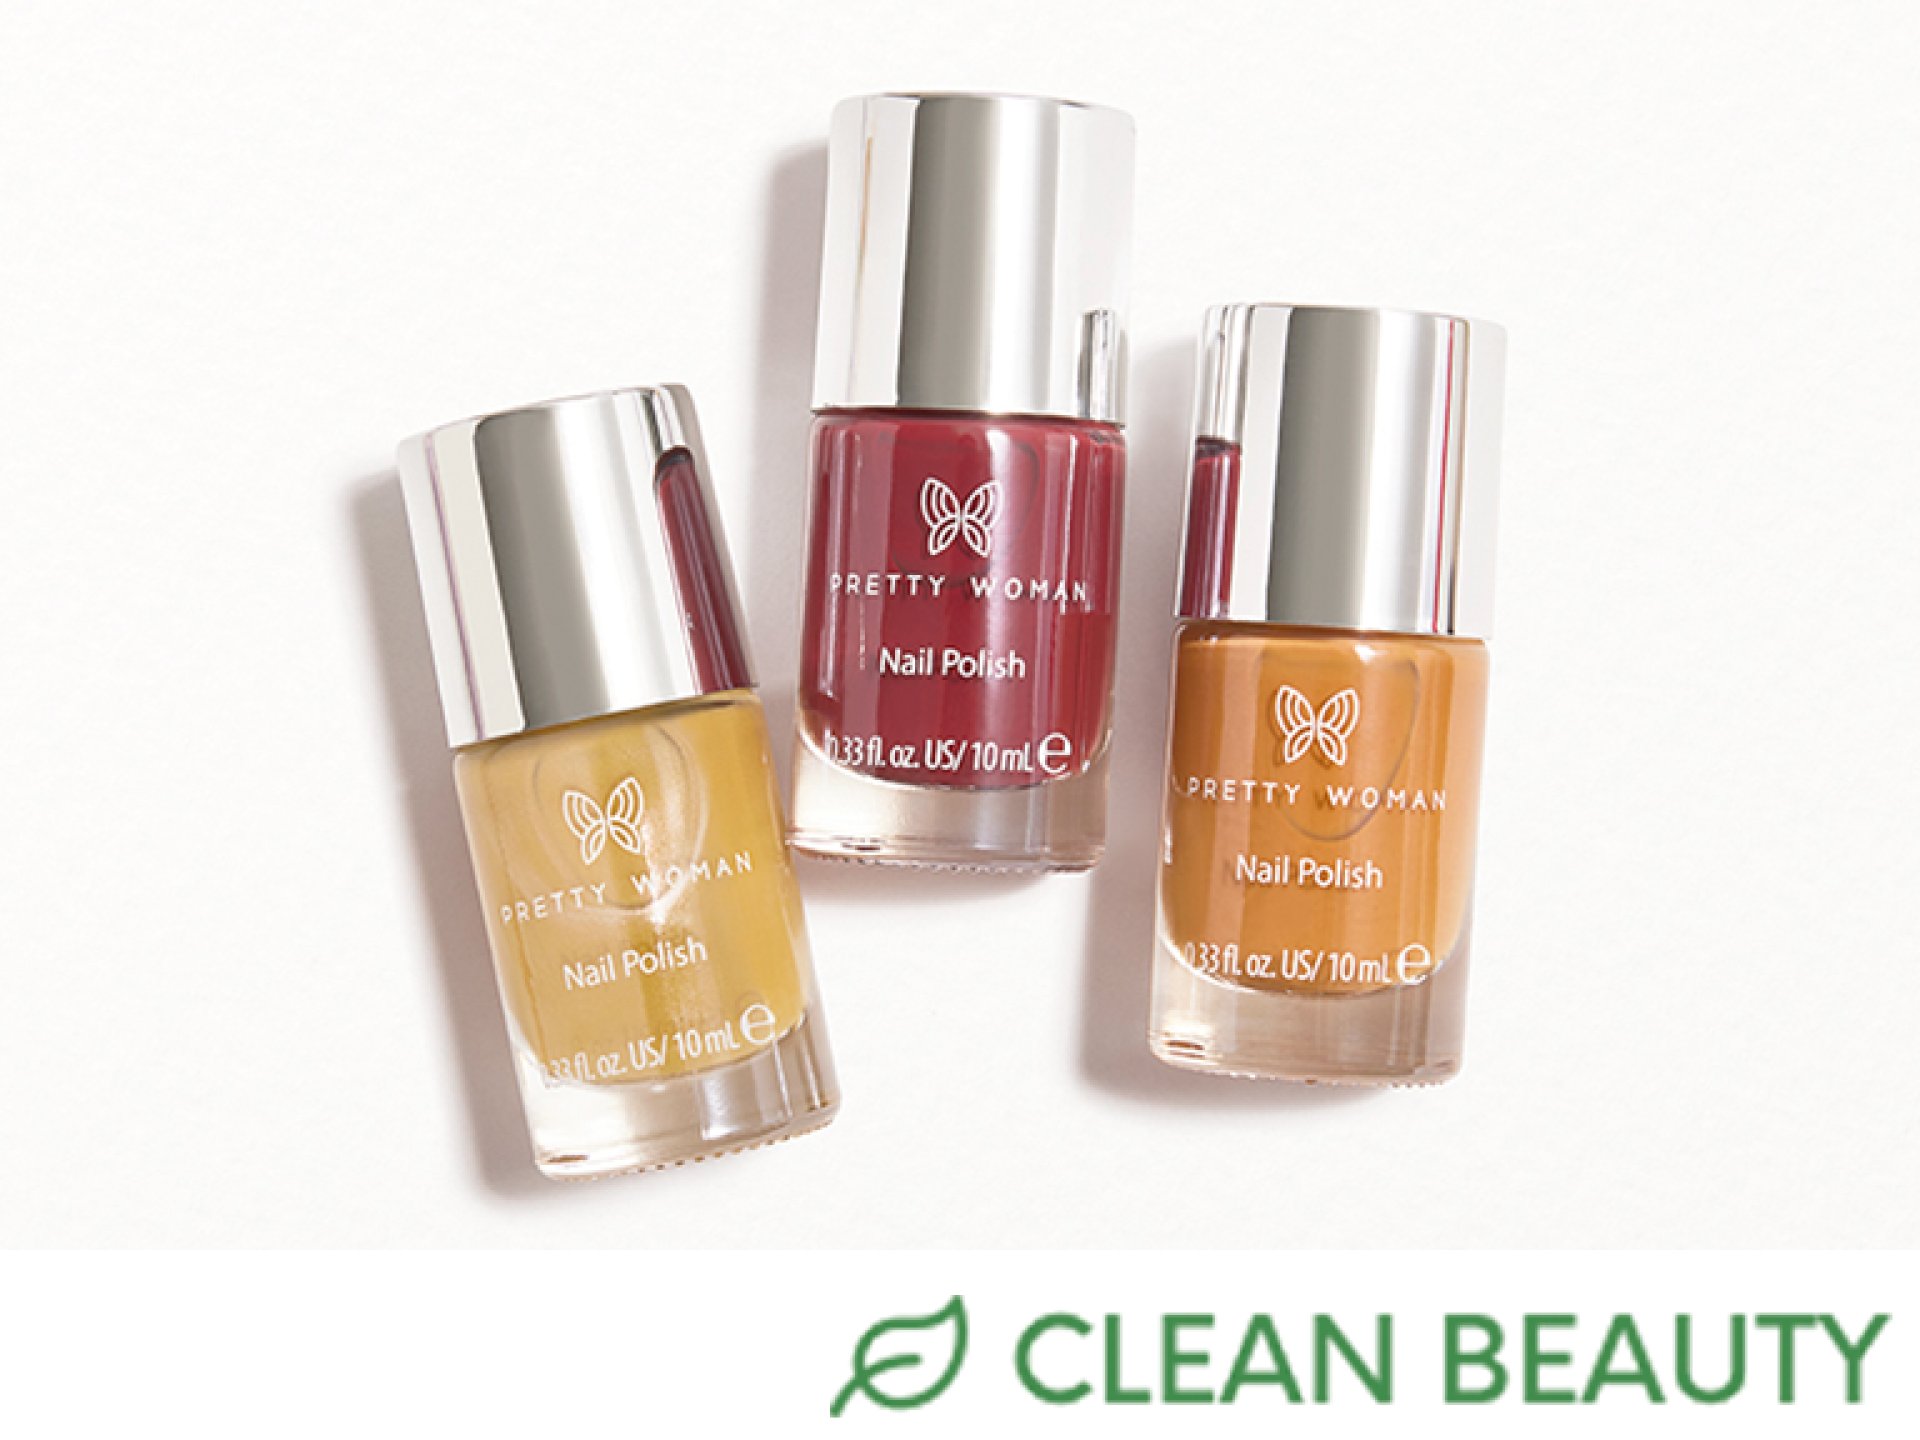 PRETTY WOMAN Nail Polish Fall Trio Set in Oh My Gourd!, Sweeter Than Honey, Put A Cork In It